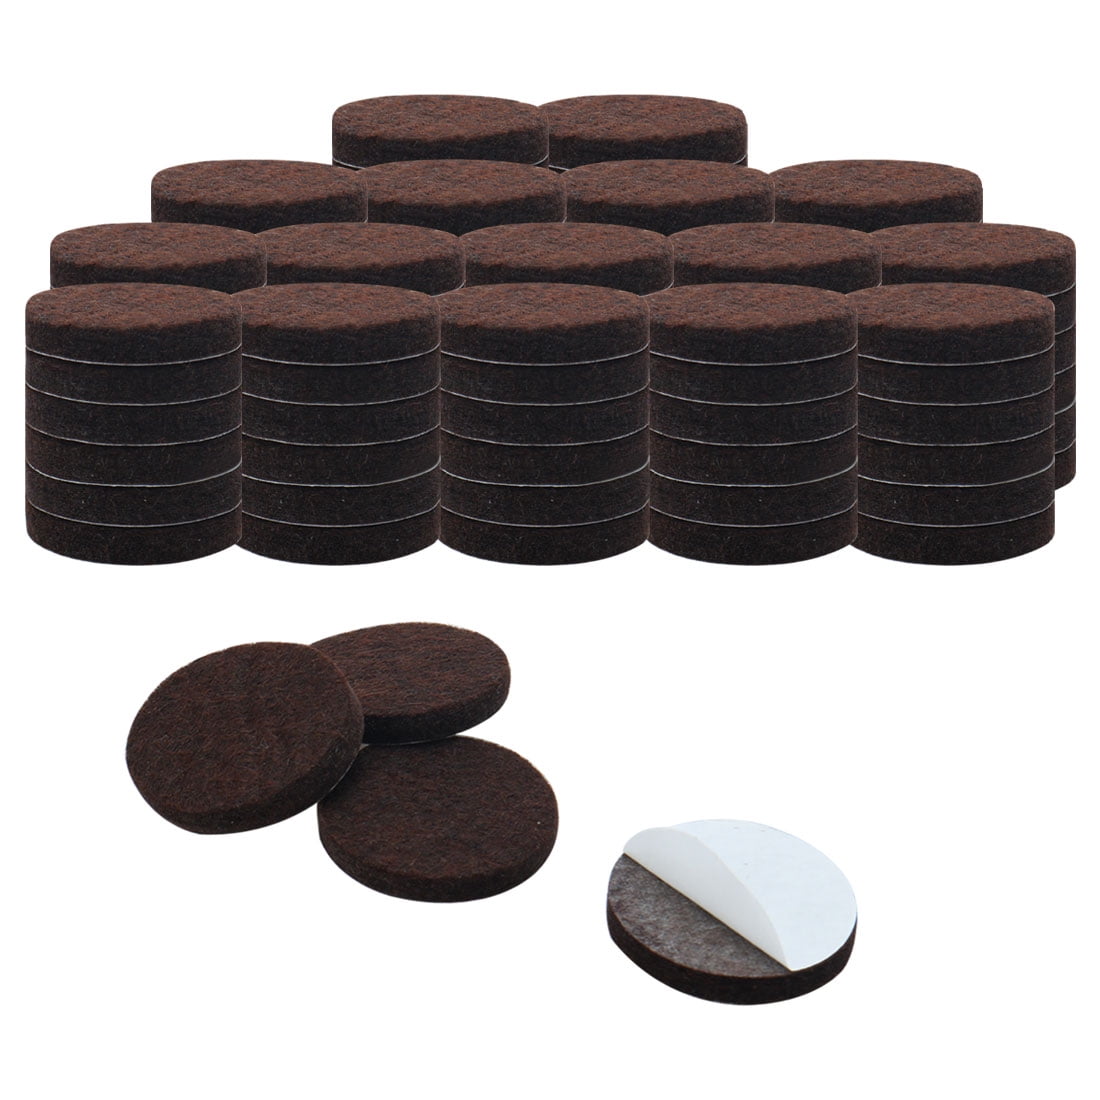 Details about   32 Round Furniture End Leg Felt Pads Floor Protector for Table Chair Feet Cover 